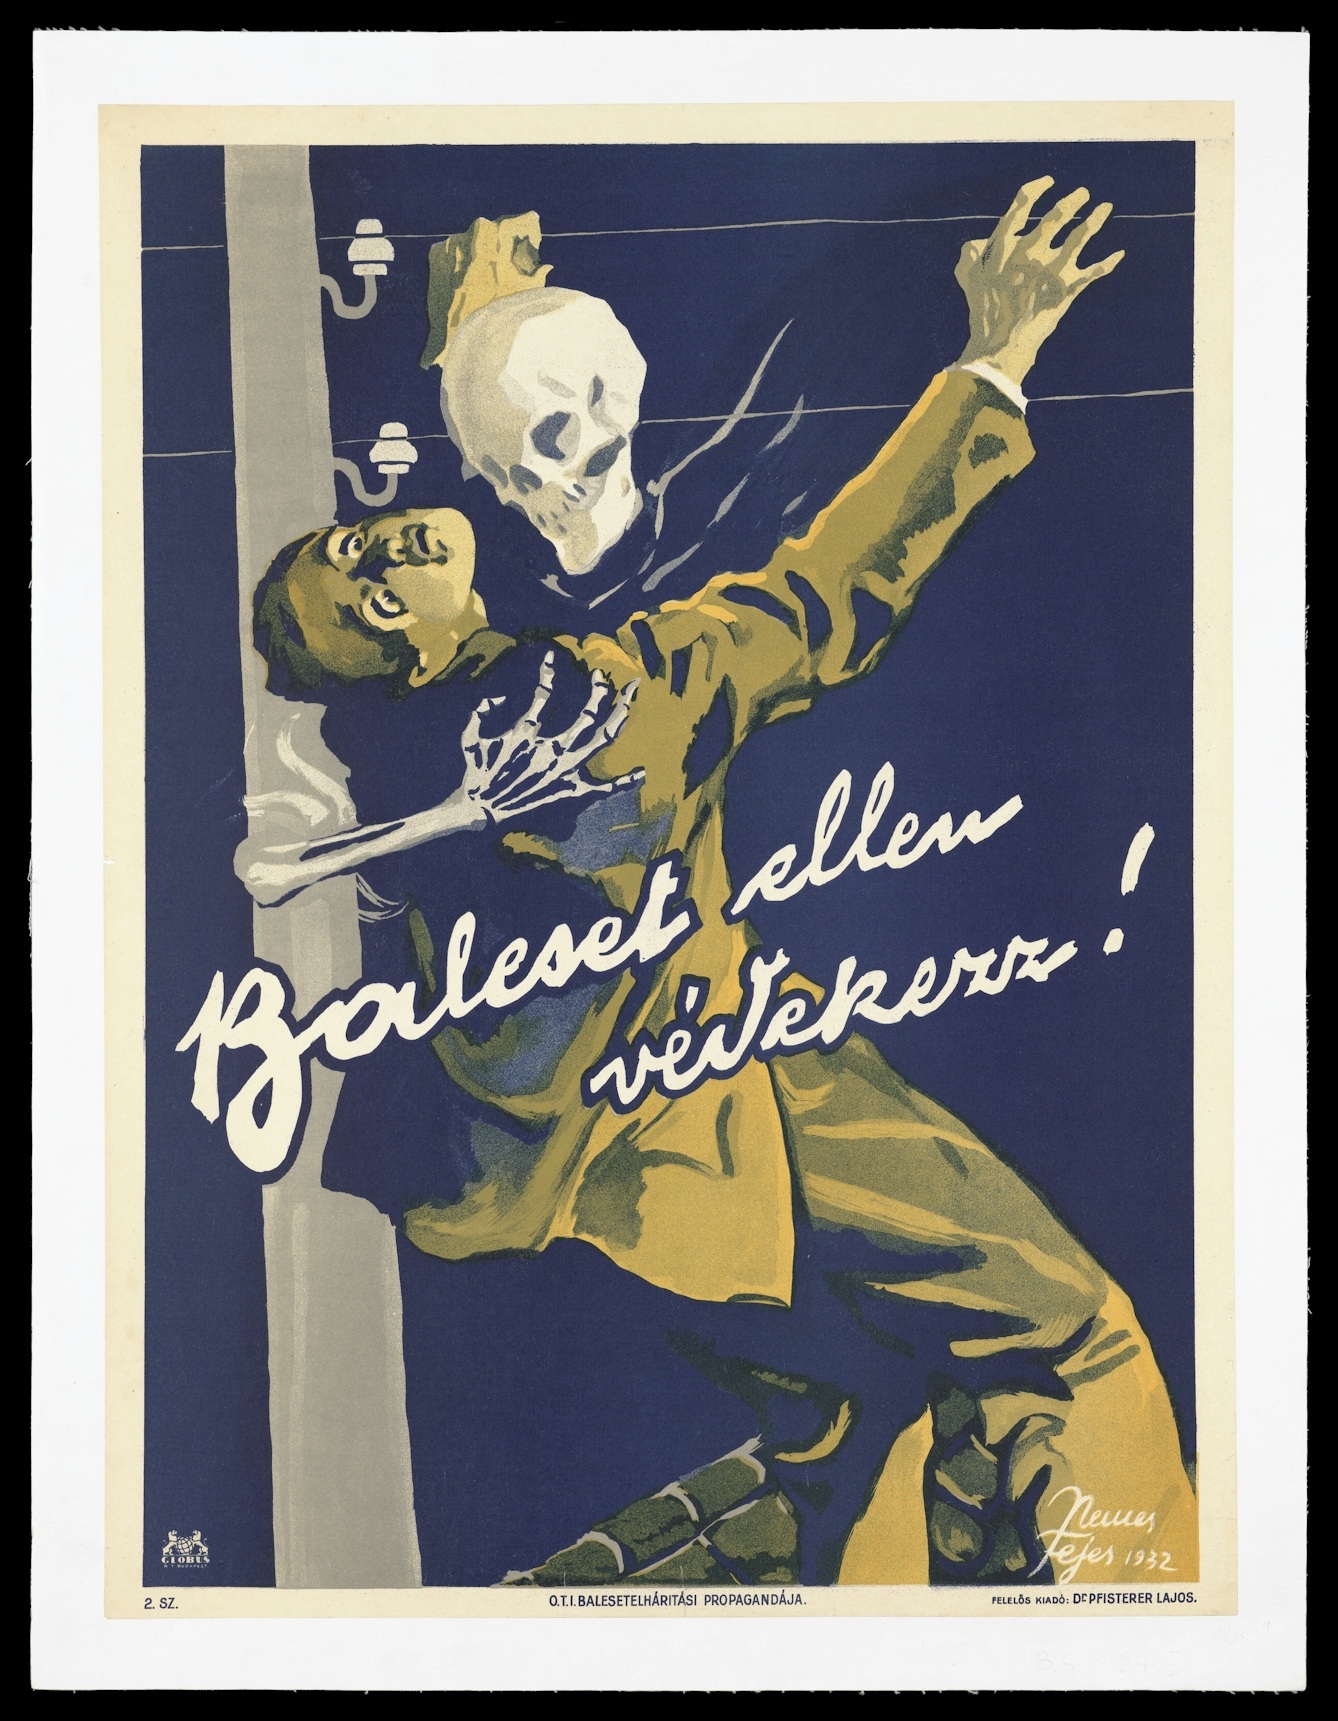 The lethal dangers of electrical innovations prompted the design of safety warnings, such as this Hungarian poster cautioning against climbing telegraph poles.